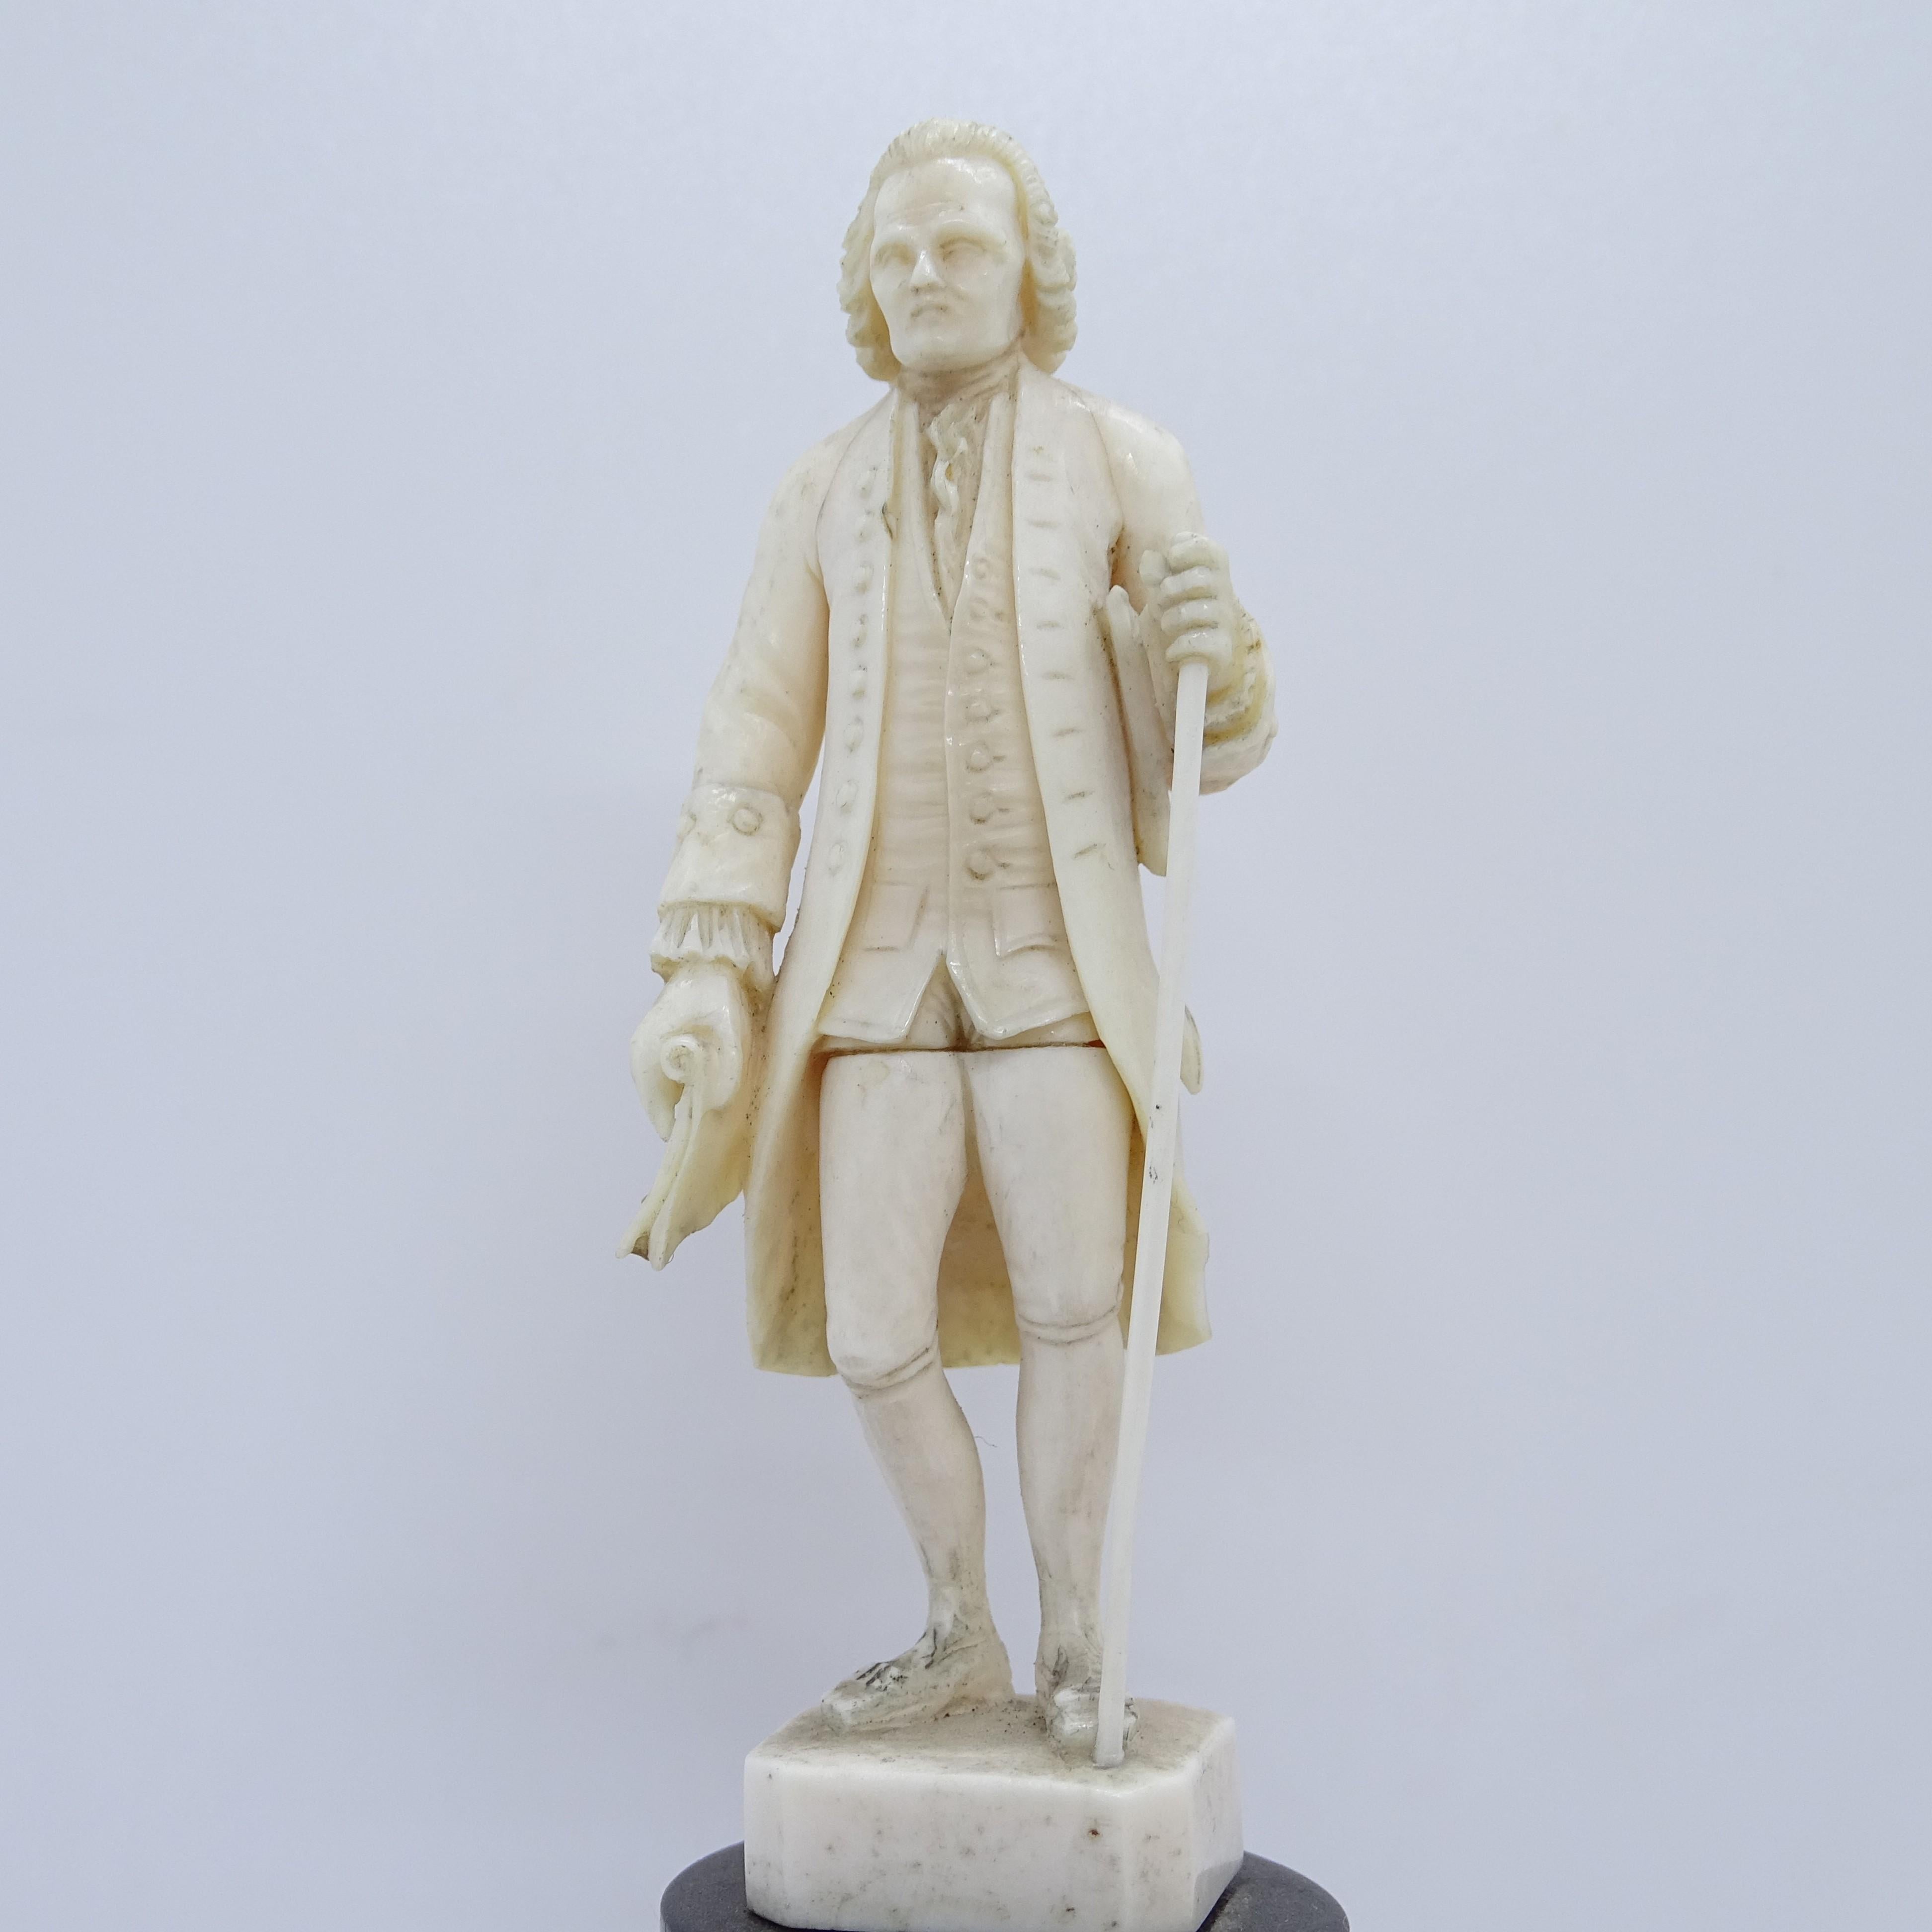  French 18thcentury Diderot sculpture, with papers in one hand For Sale 5